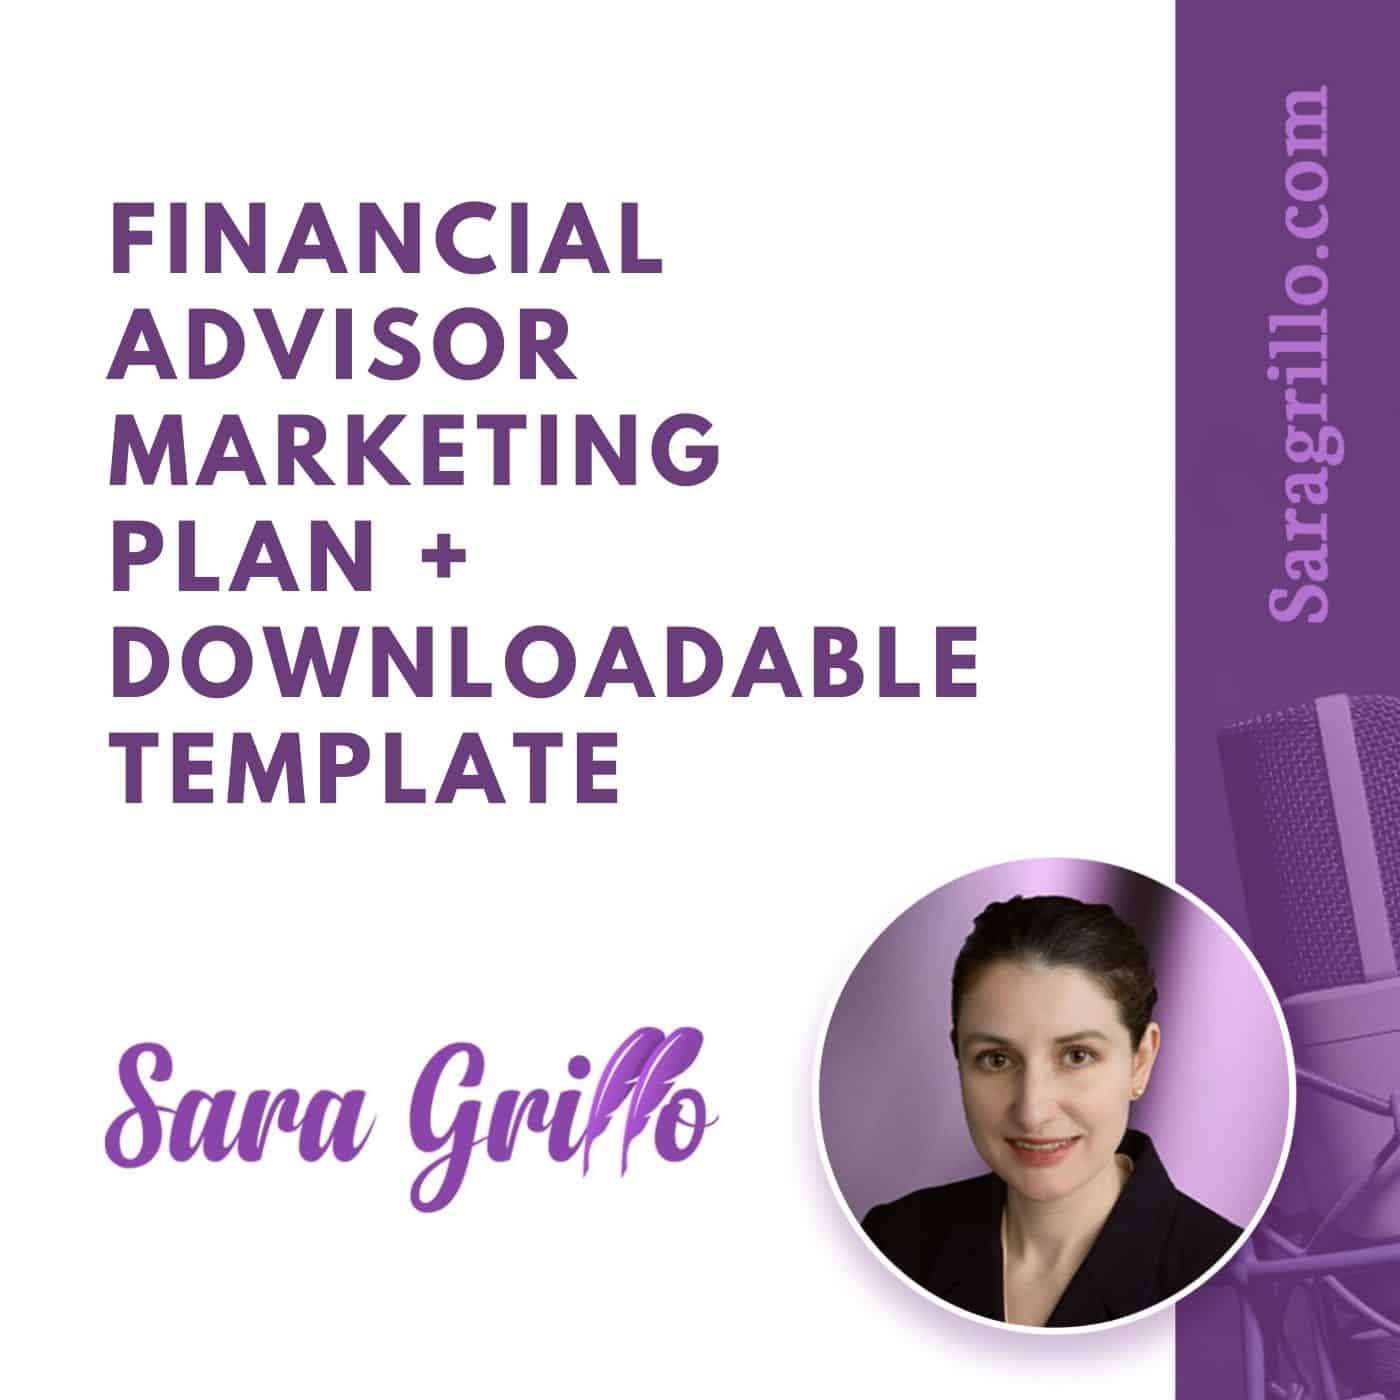 You will learn what the parts of a good financial advisor marketing plan are and be able to access a downloadable template